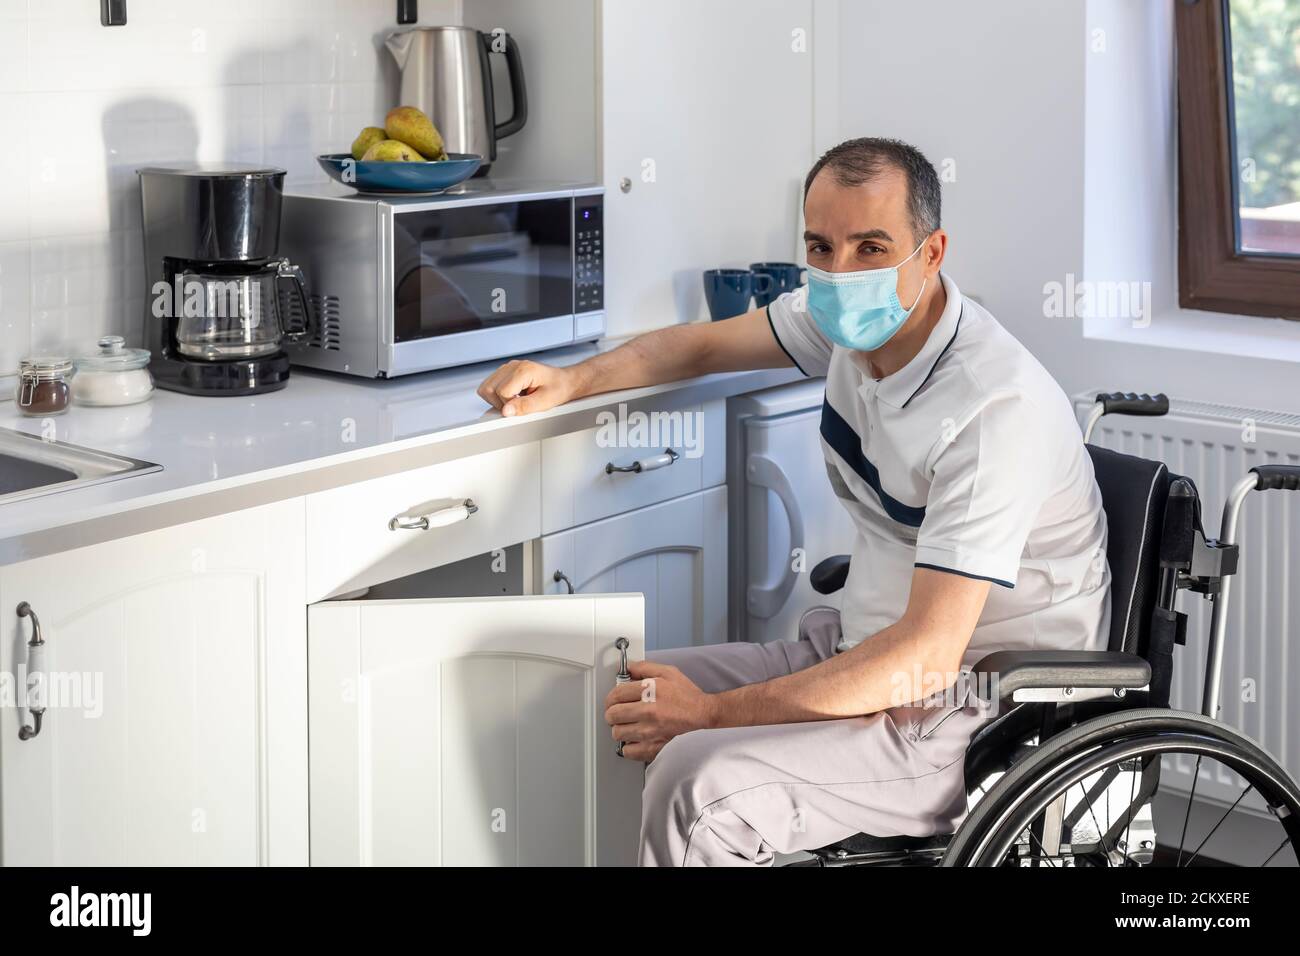 Smiling Young Handicapped Man Sitting On Wheelchair In Kitchen.  Young man wearing face mask sitting in front of kitchen. Focus on his face. Stock Photo